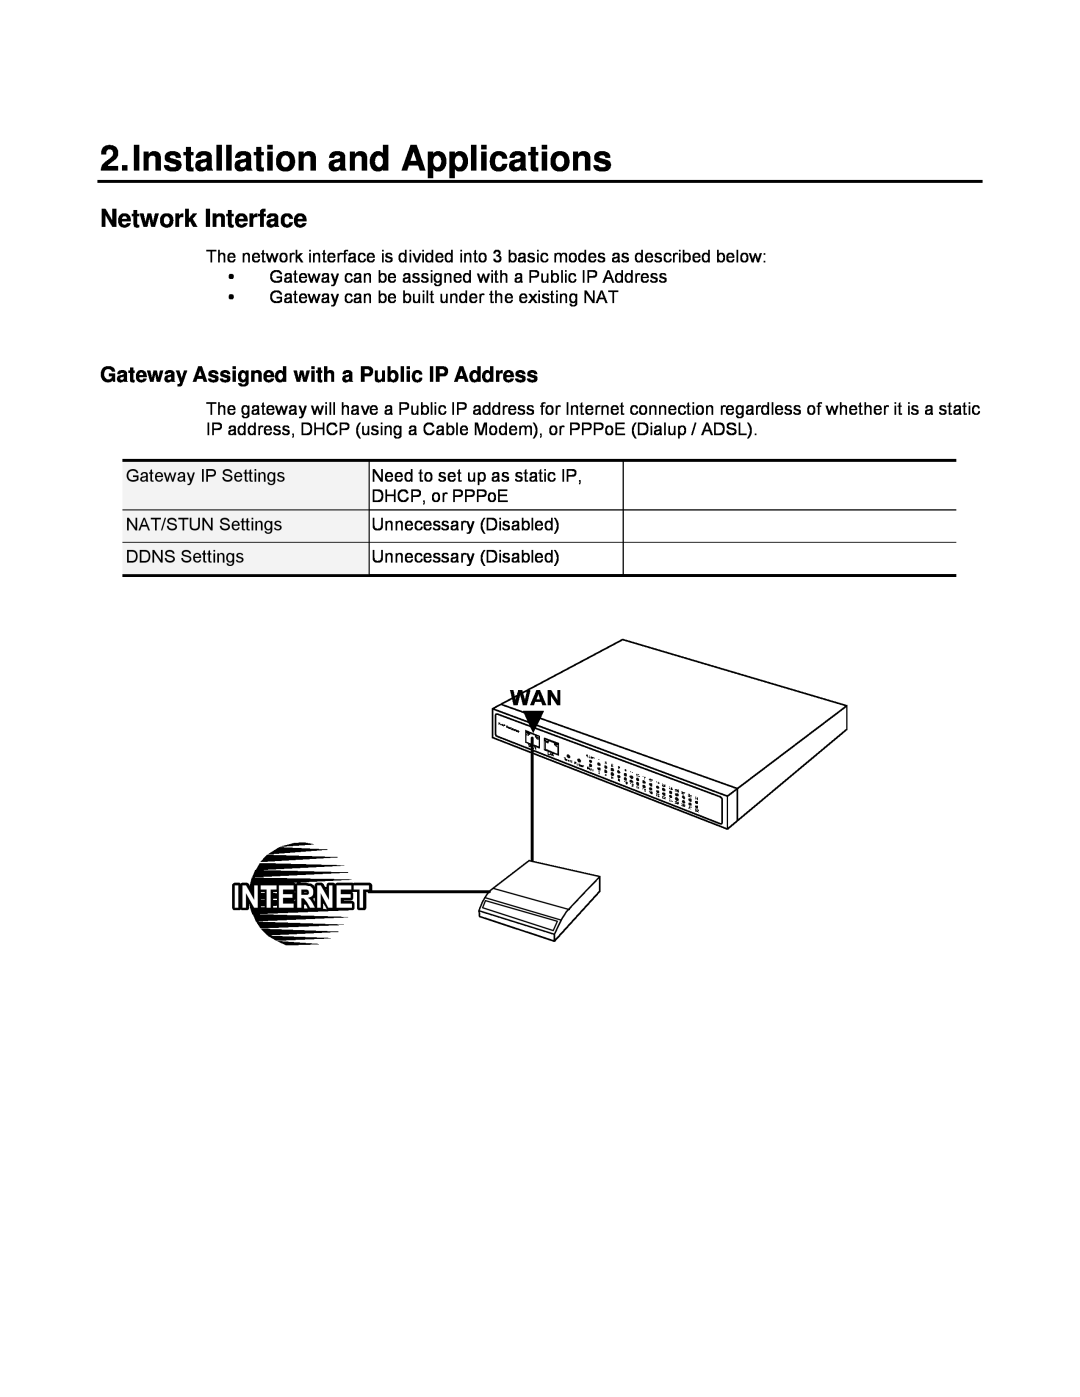 D-Link DVG-2032S user manual Installation and Applications, Network Interface, Gateway Assigned with a Public IP Address 